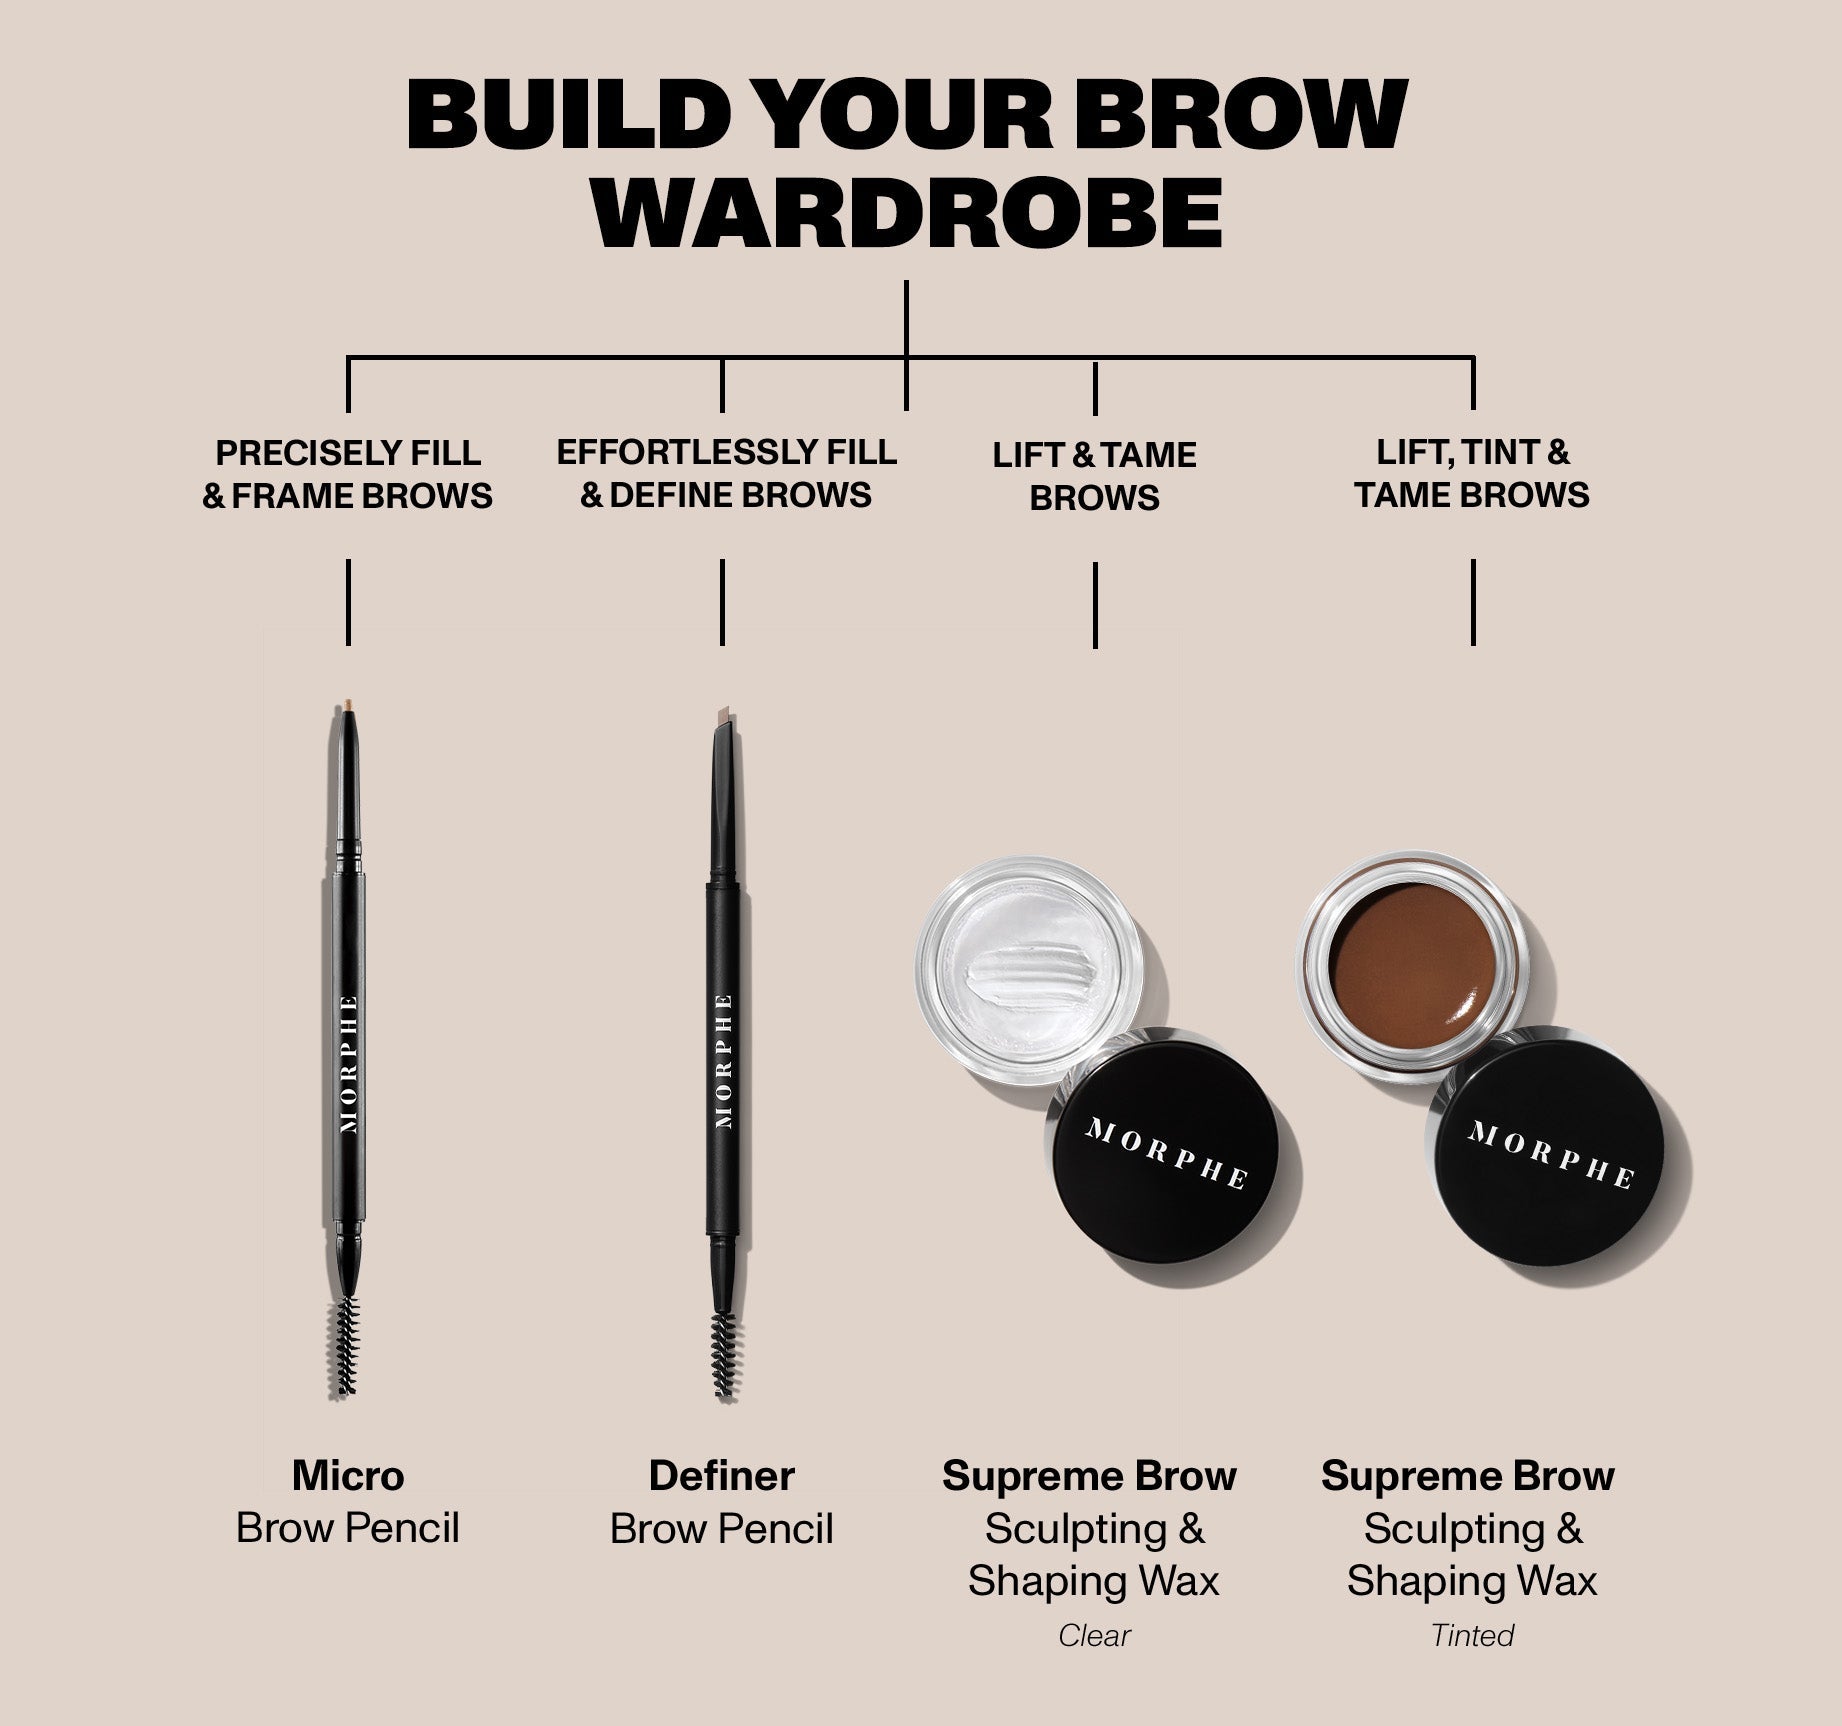 Supreme Brow Sculpting and Shaping Wax - Clear - Image 9